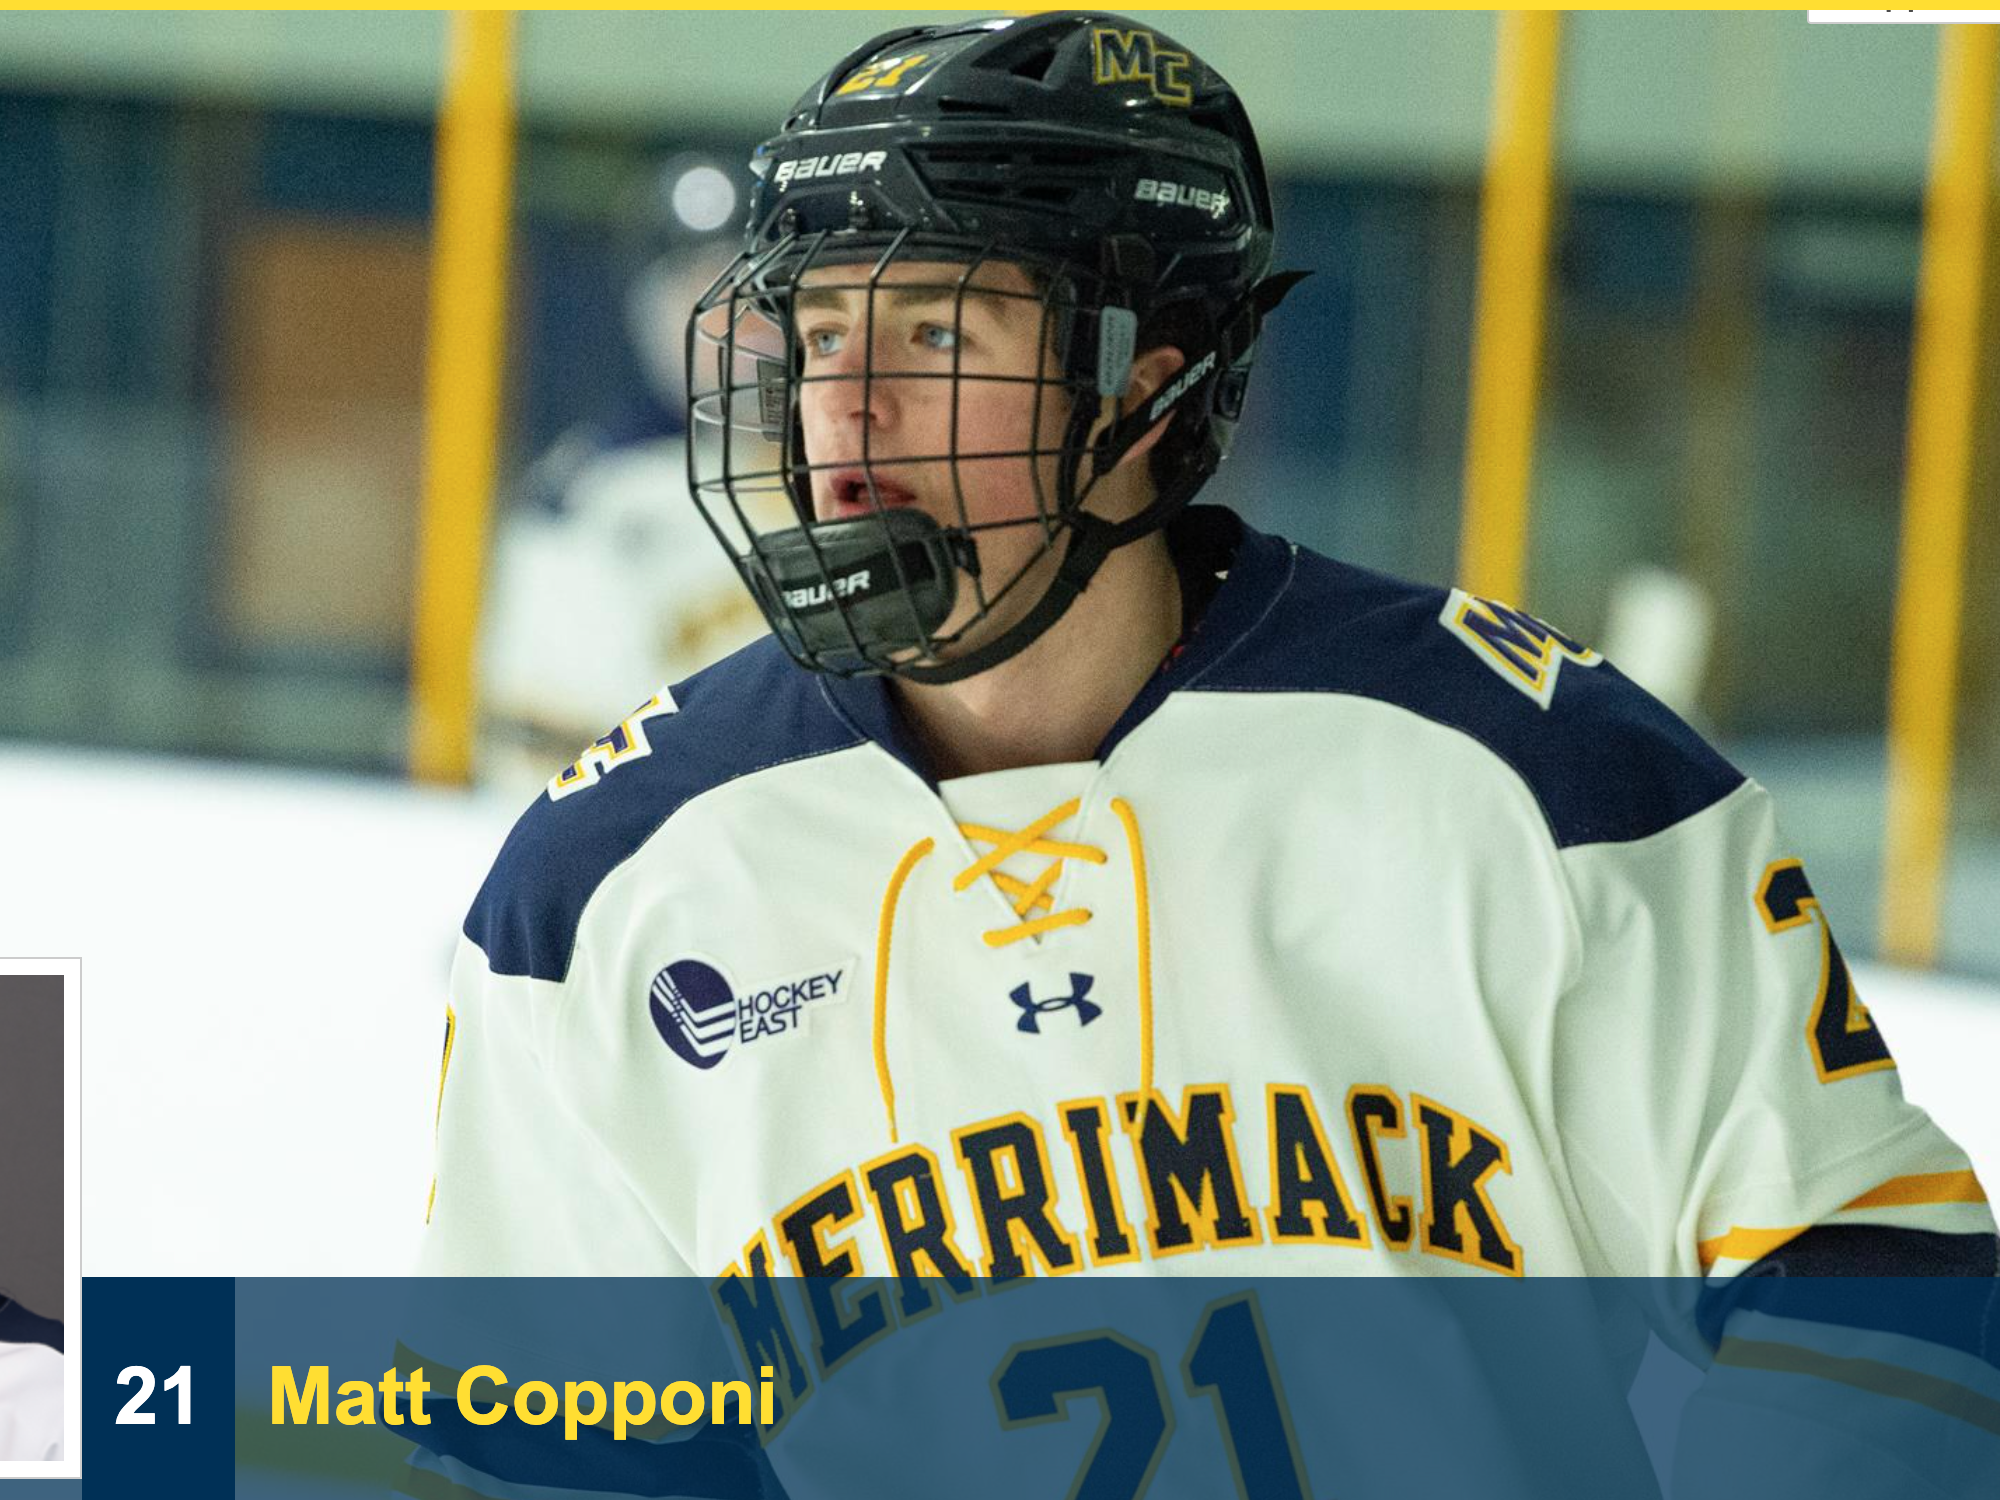 The Edmonton Oilers have drafted Matt Copponi at 216th overall